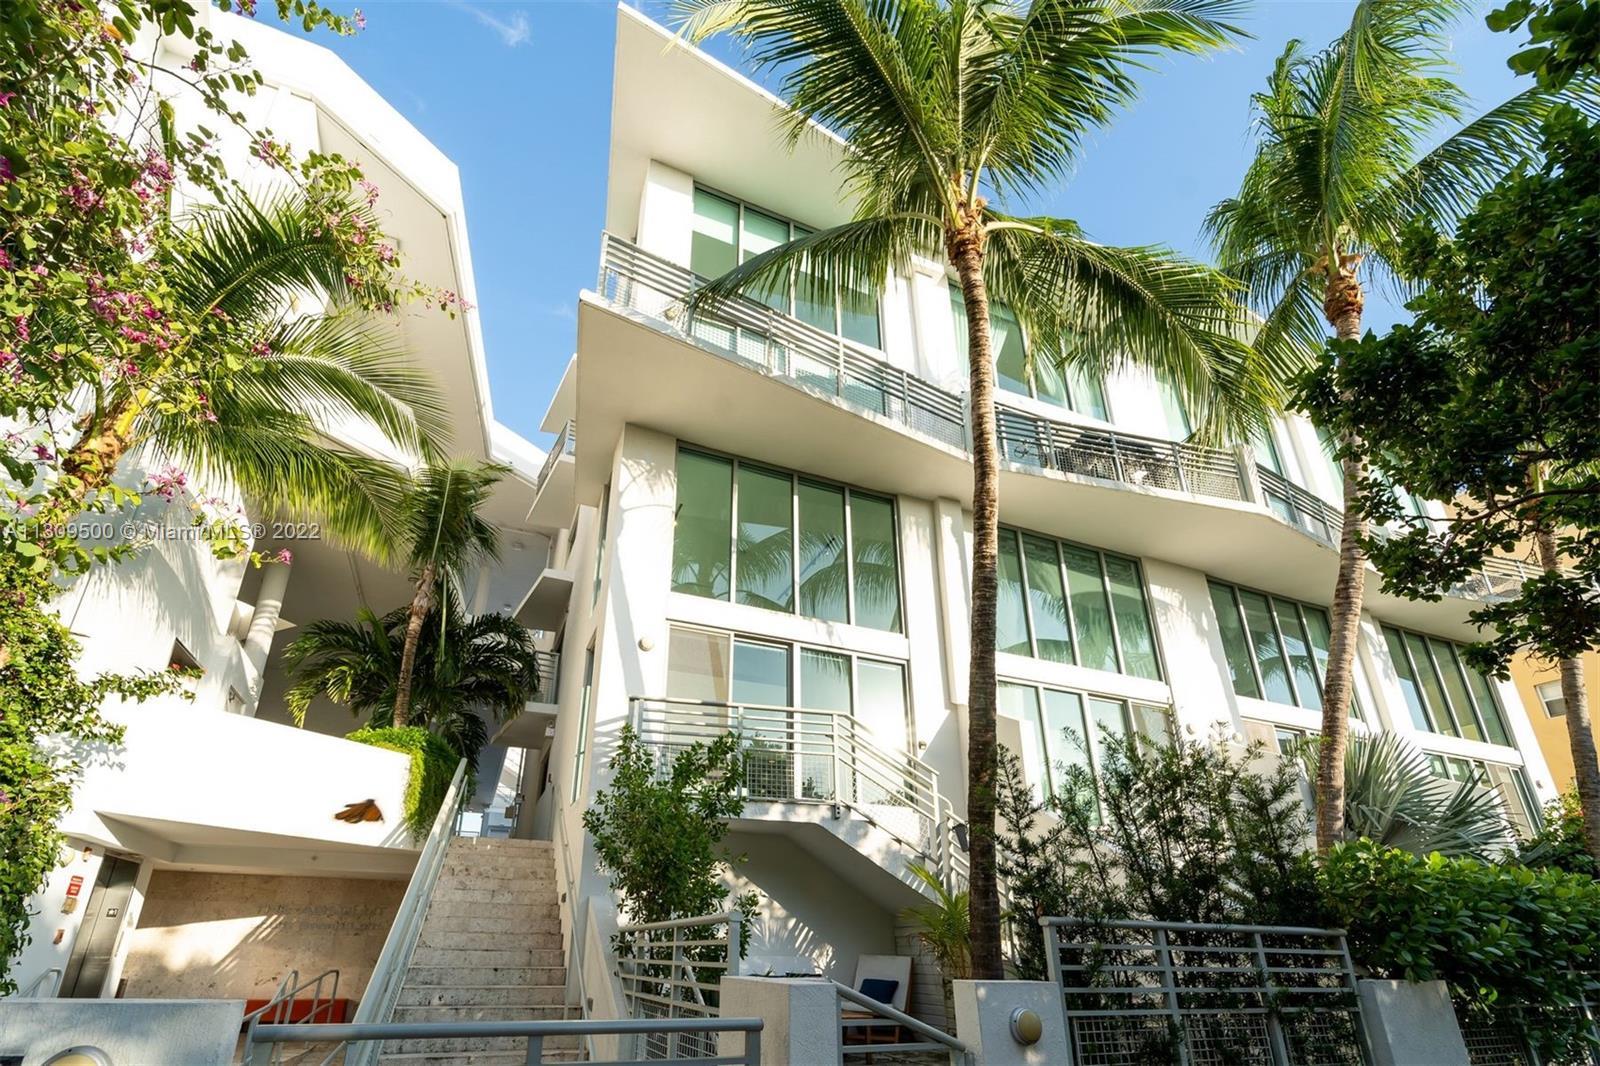 Turn-key, Sunny and Bright 2 Story Loft in the heart of South of Fifth, Miami Beach’s most exclusive